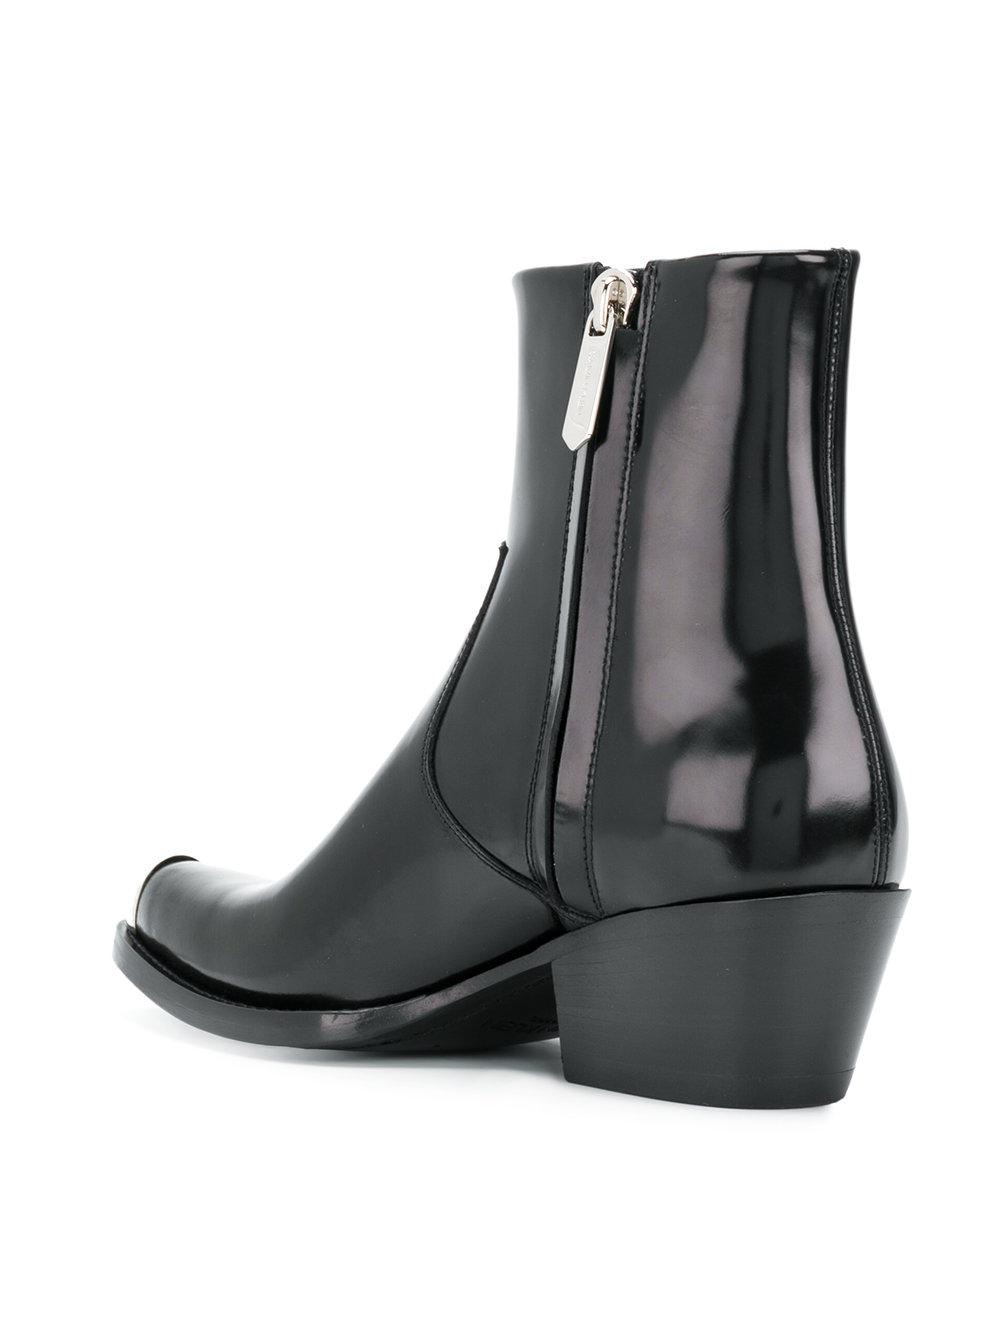 Leather Steel Toe Cap Ankle Boots 